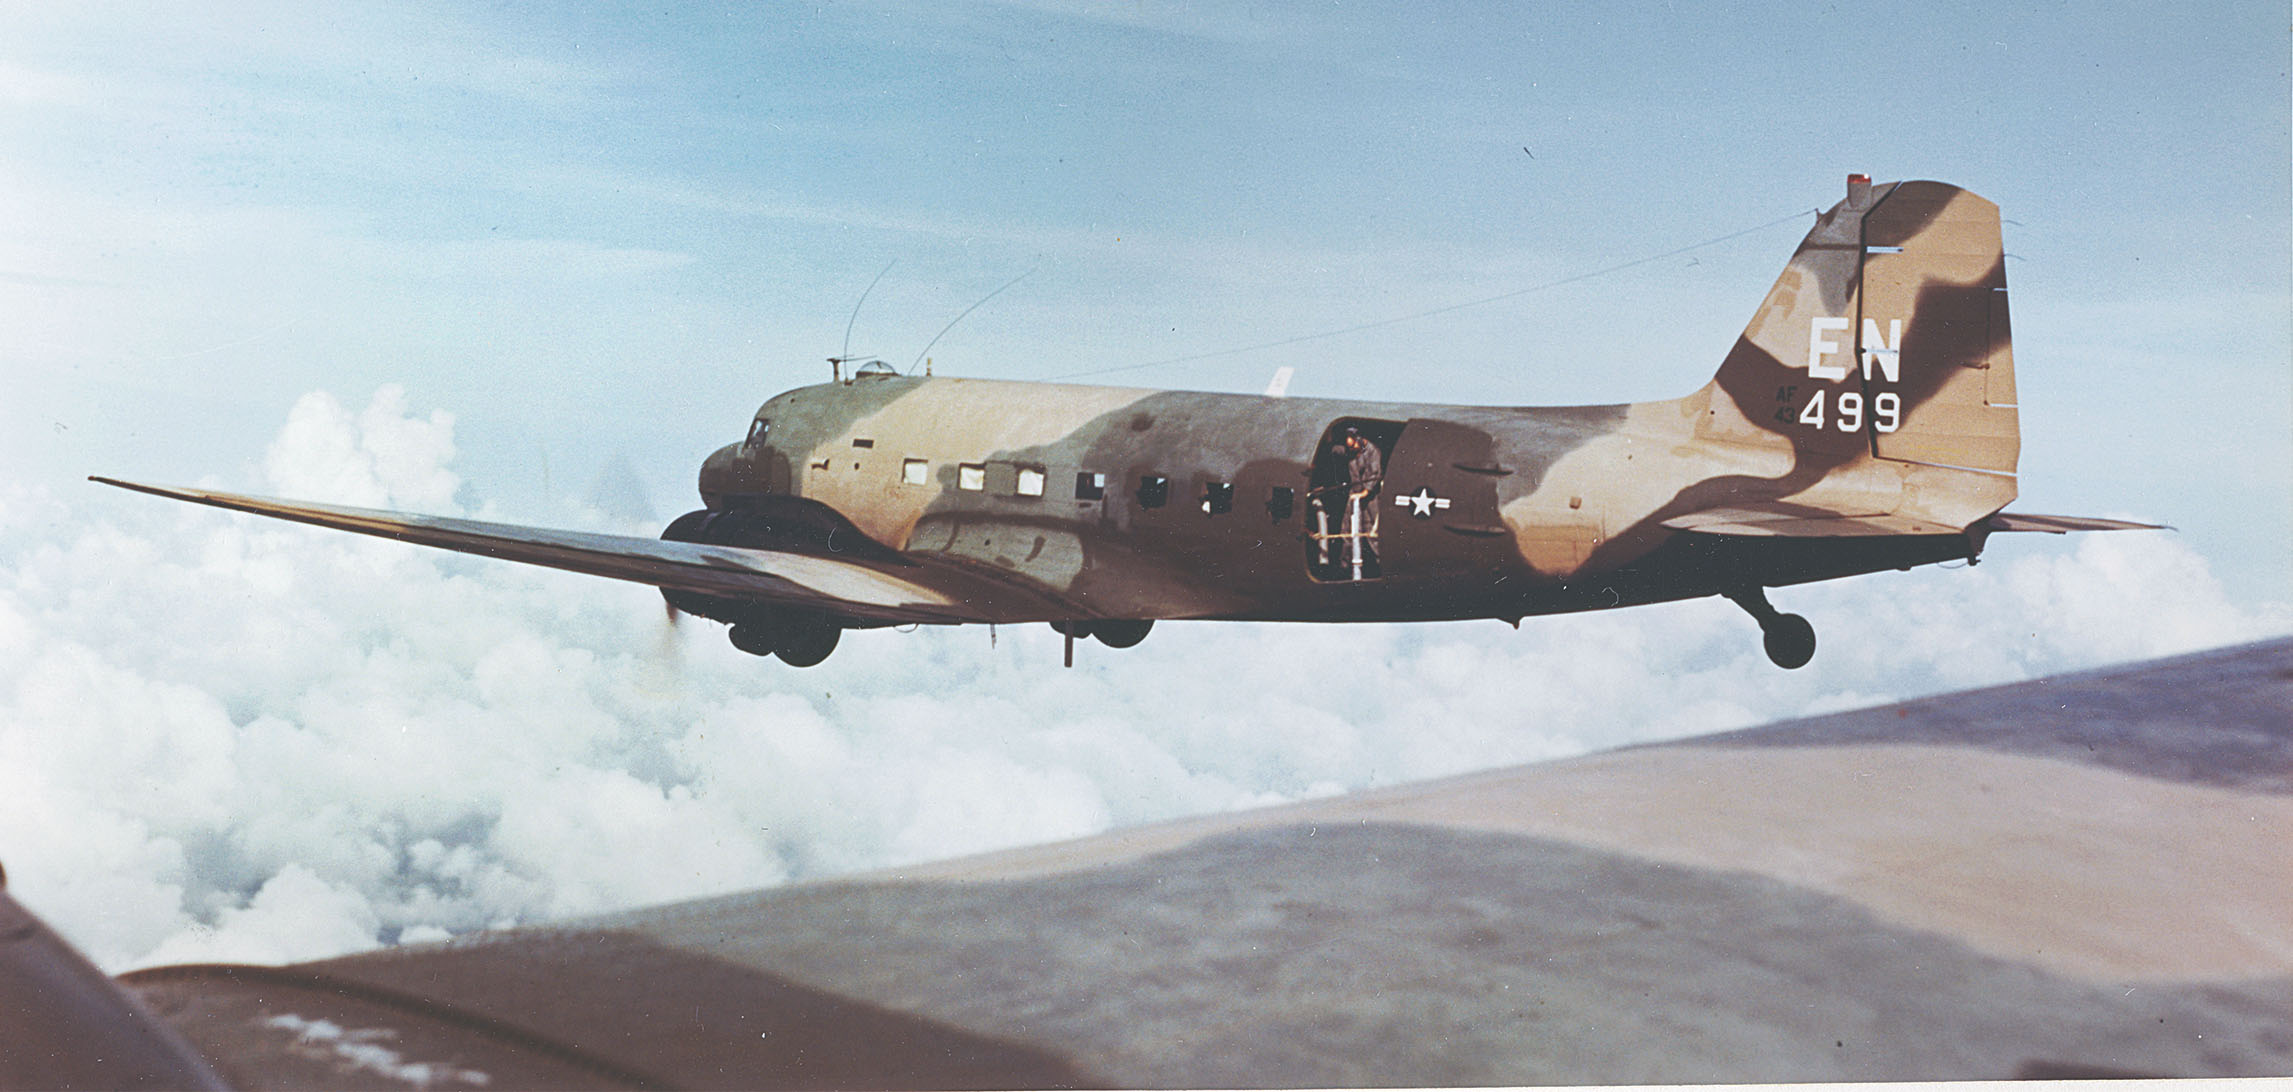 A Spooky gunship of the 4th Air Commando Squadron deploys on another mission. A crewman stands at the rear cargo door of the aircraft, nicknamed “Puff the Magic Dragon.” / U.S. Air Force